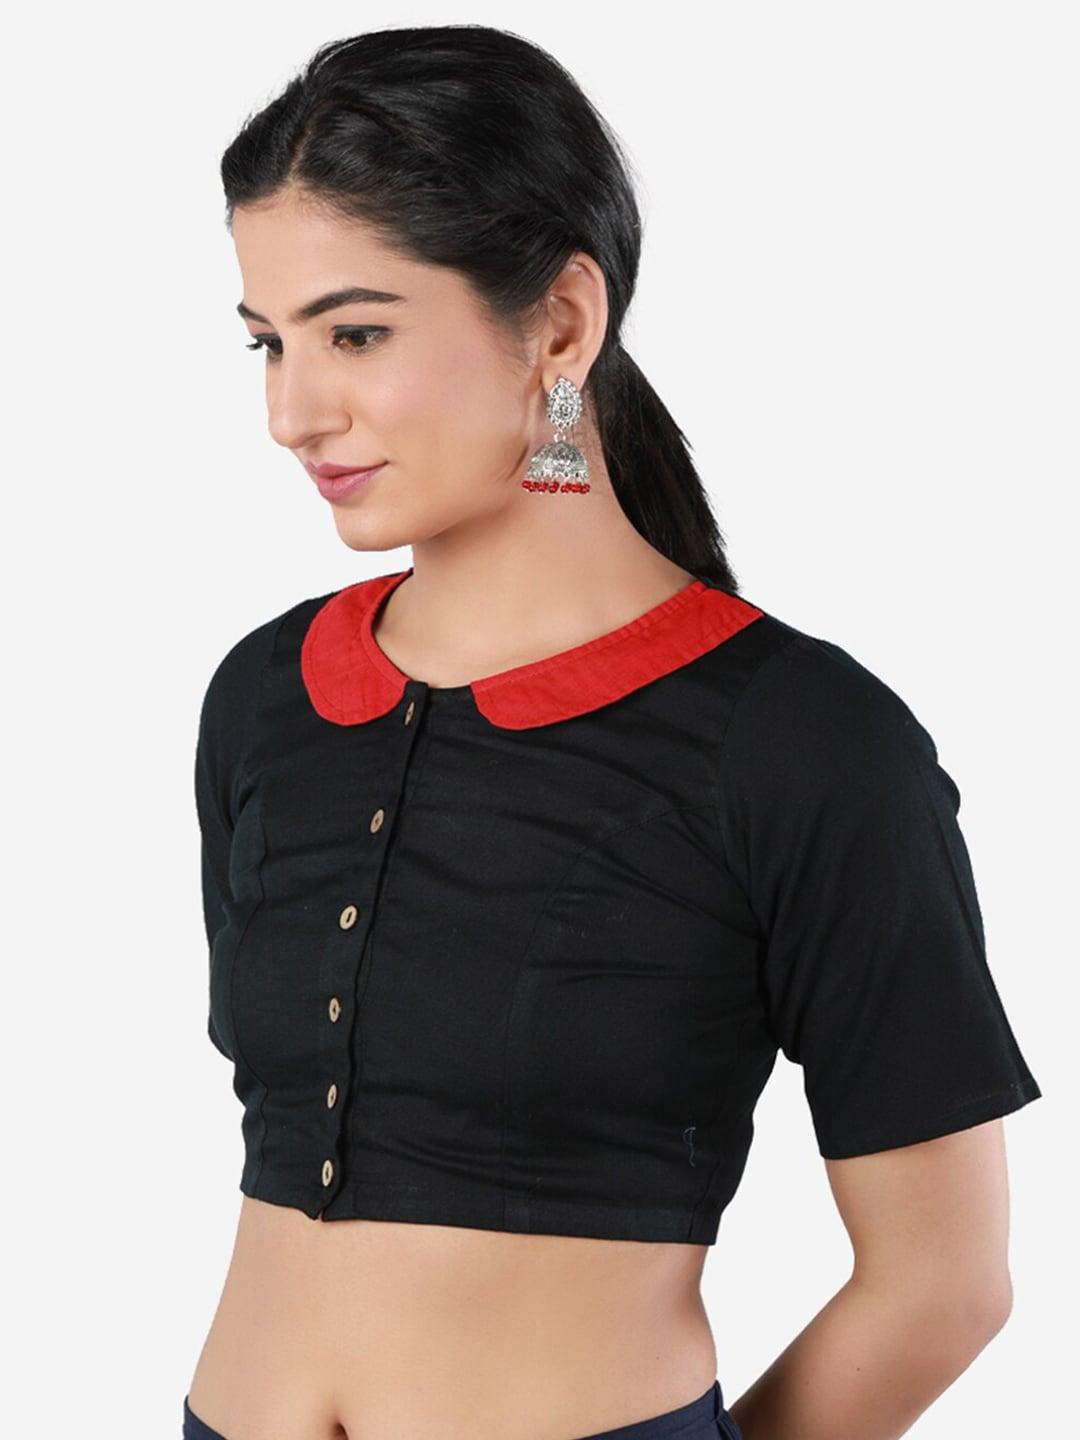 llajja women black & red solid pure cotton readymade saree blouse